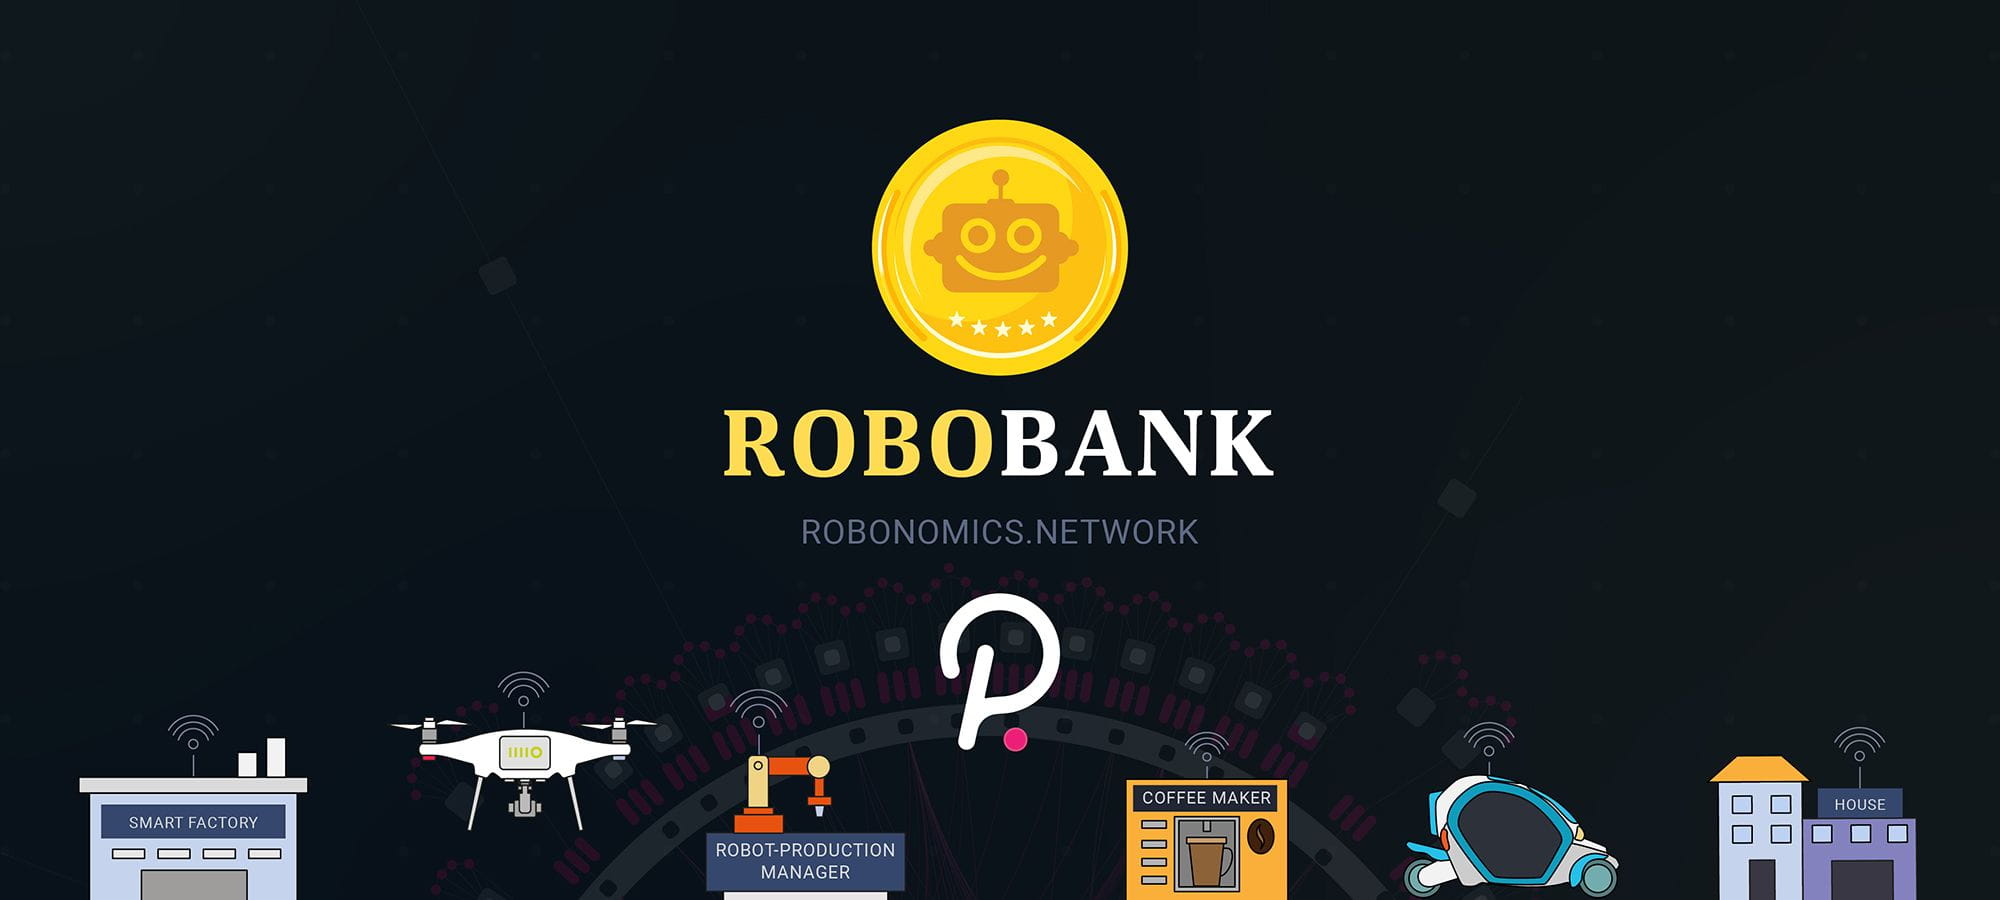 Robobank. Accept any Polkadot token in automation services